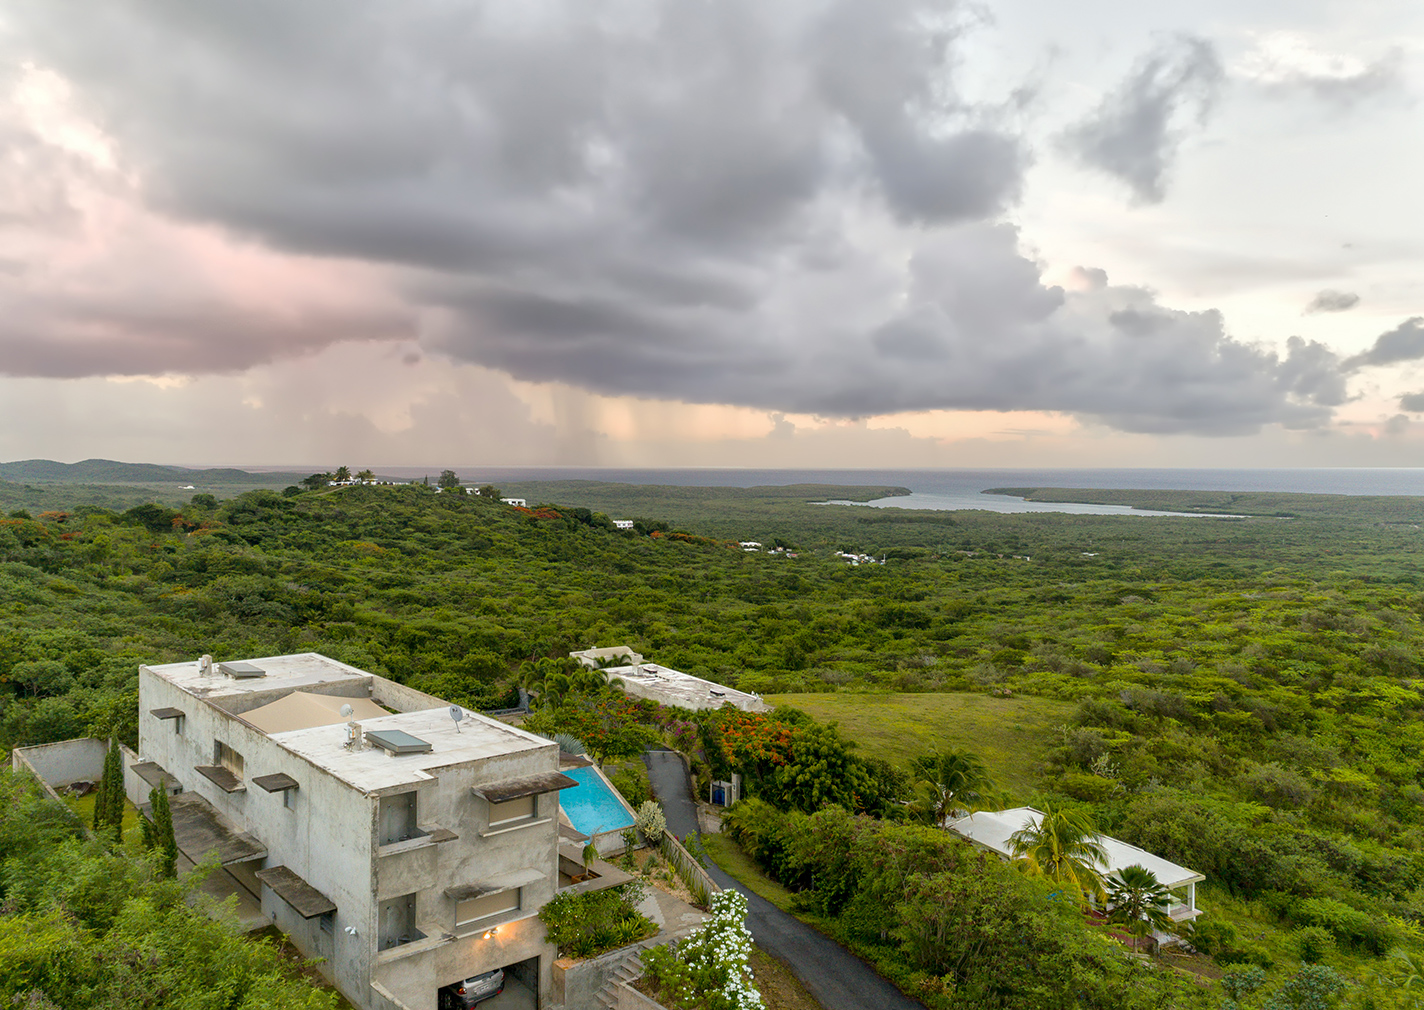 This brutalist eco-home is for sale on Puerto Rico’s Vieques Island